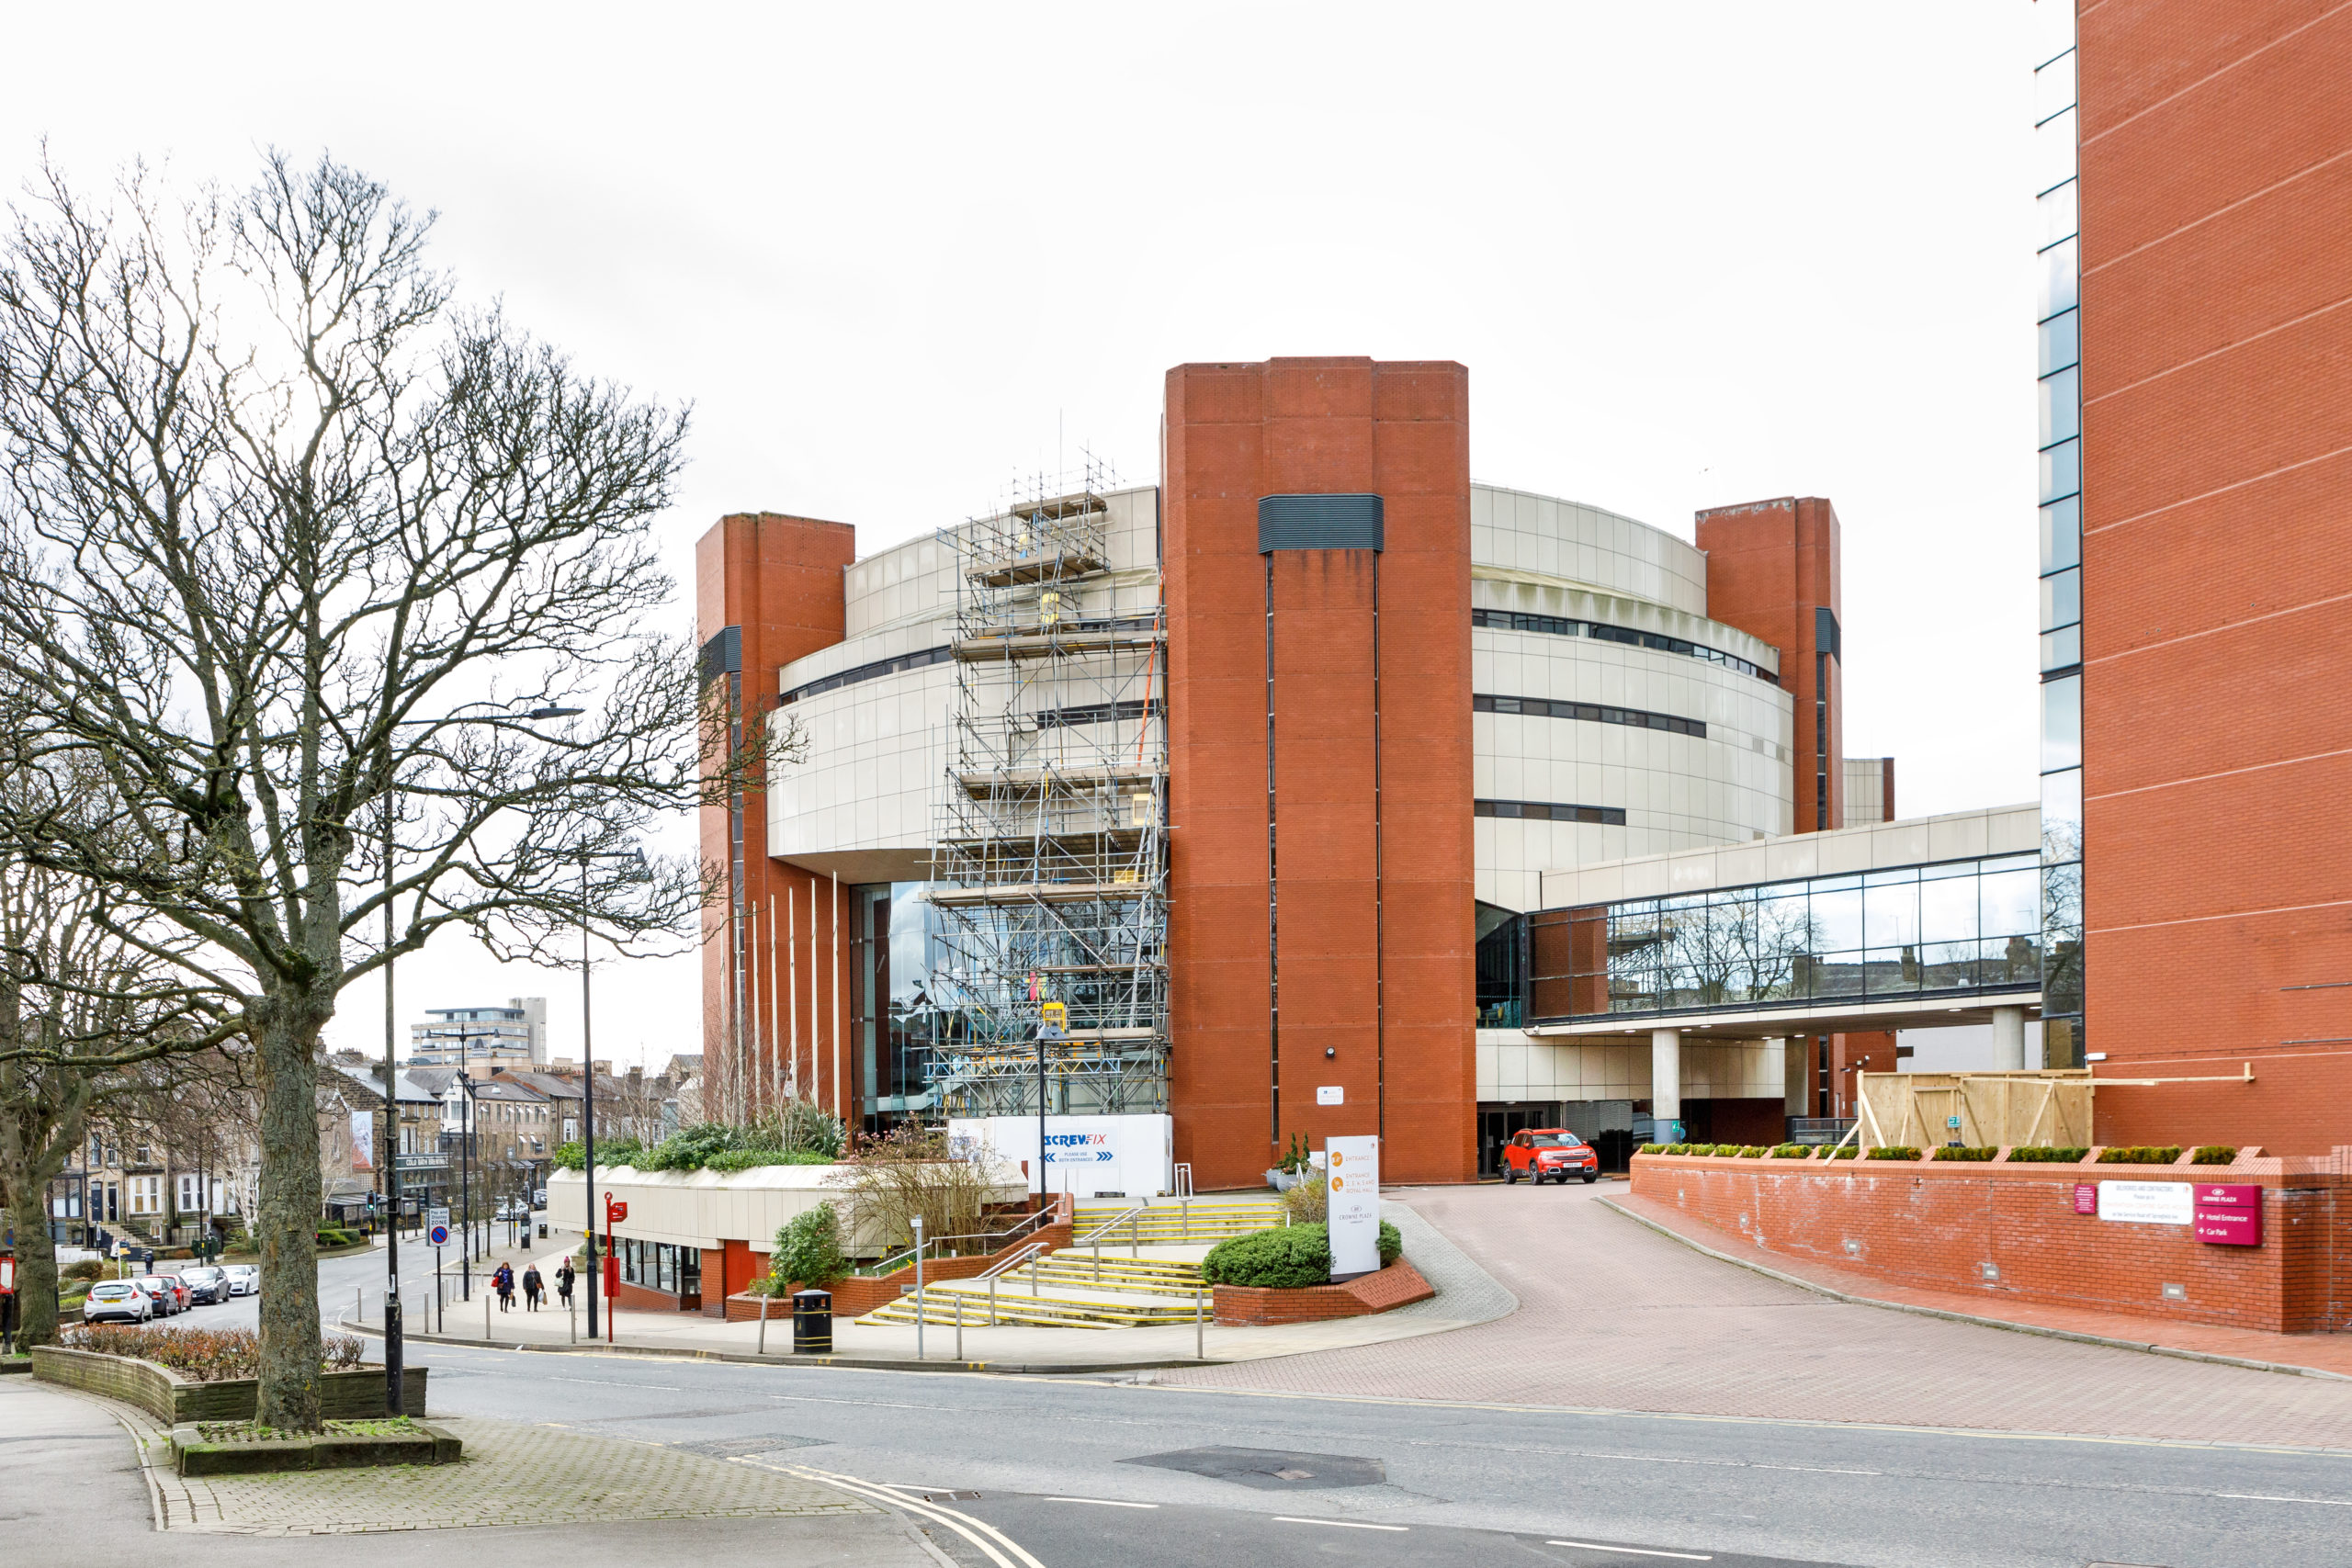 Harrogate Convention Centre's upcoming events could be affected by coronavirus in Harrogate